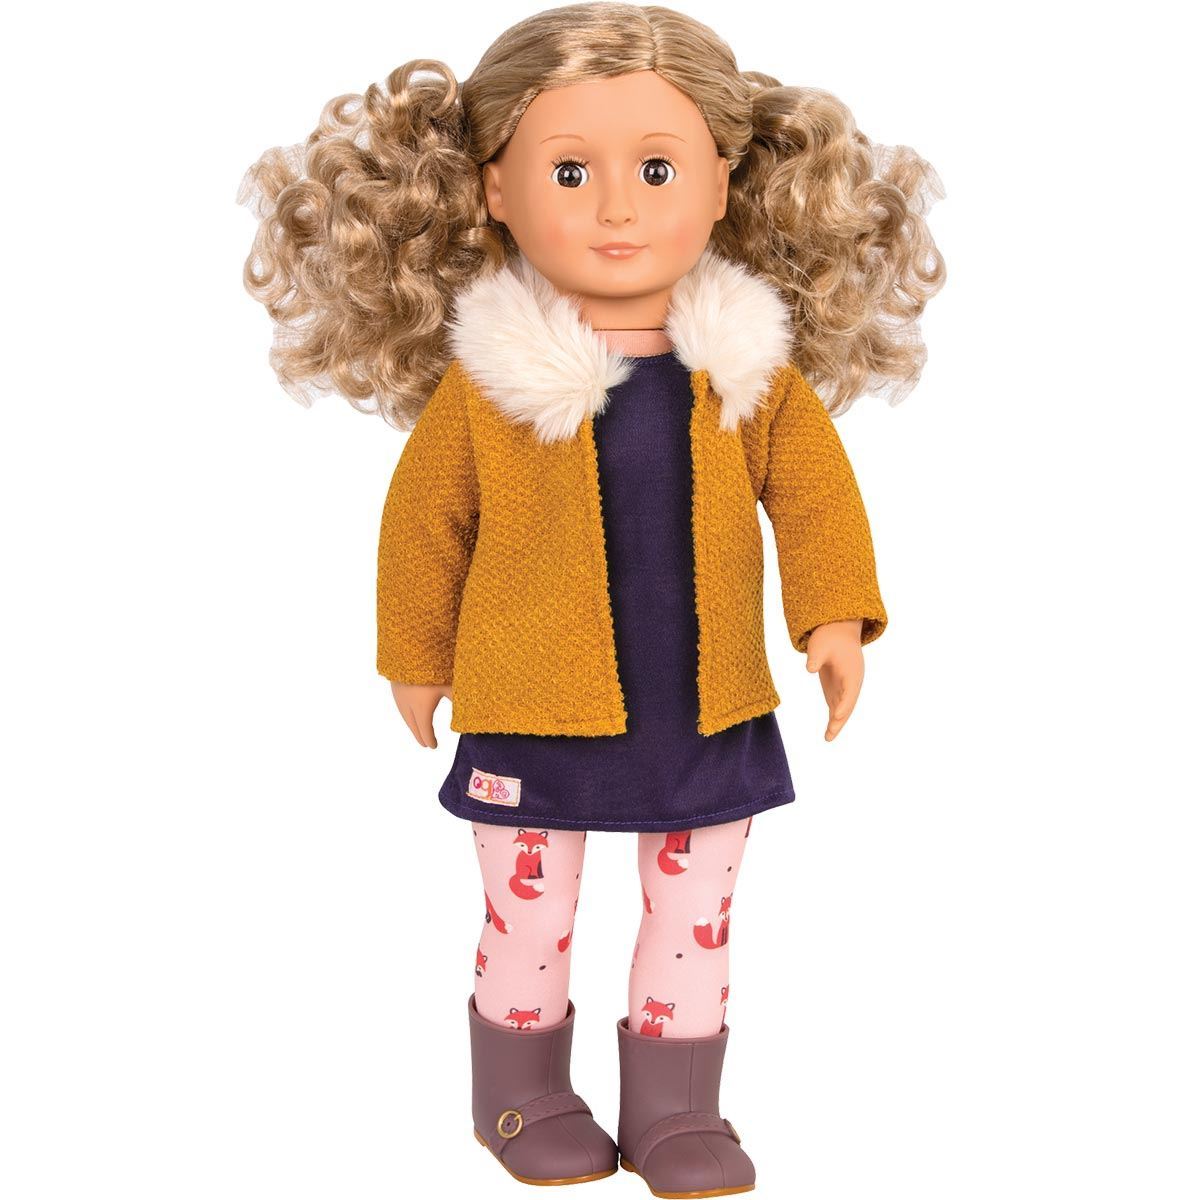 Florence Doll, Our Generation Dolls, Dolls, Mulberry Bush